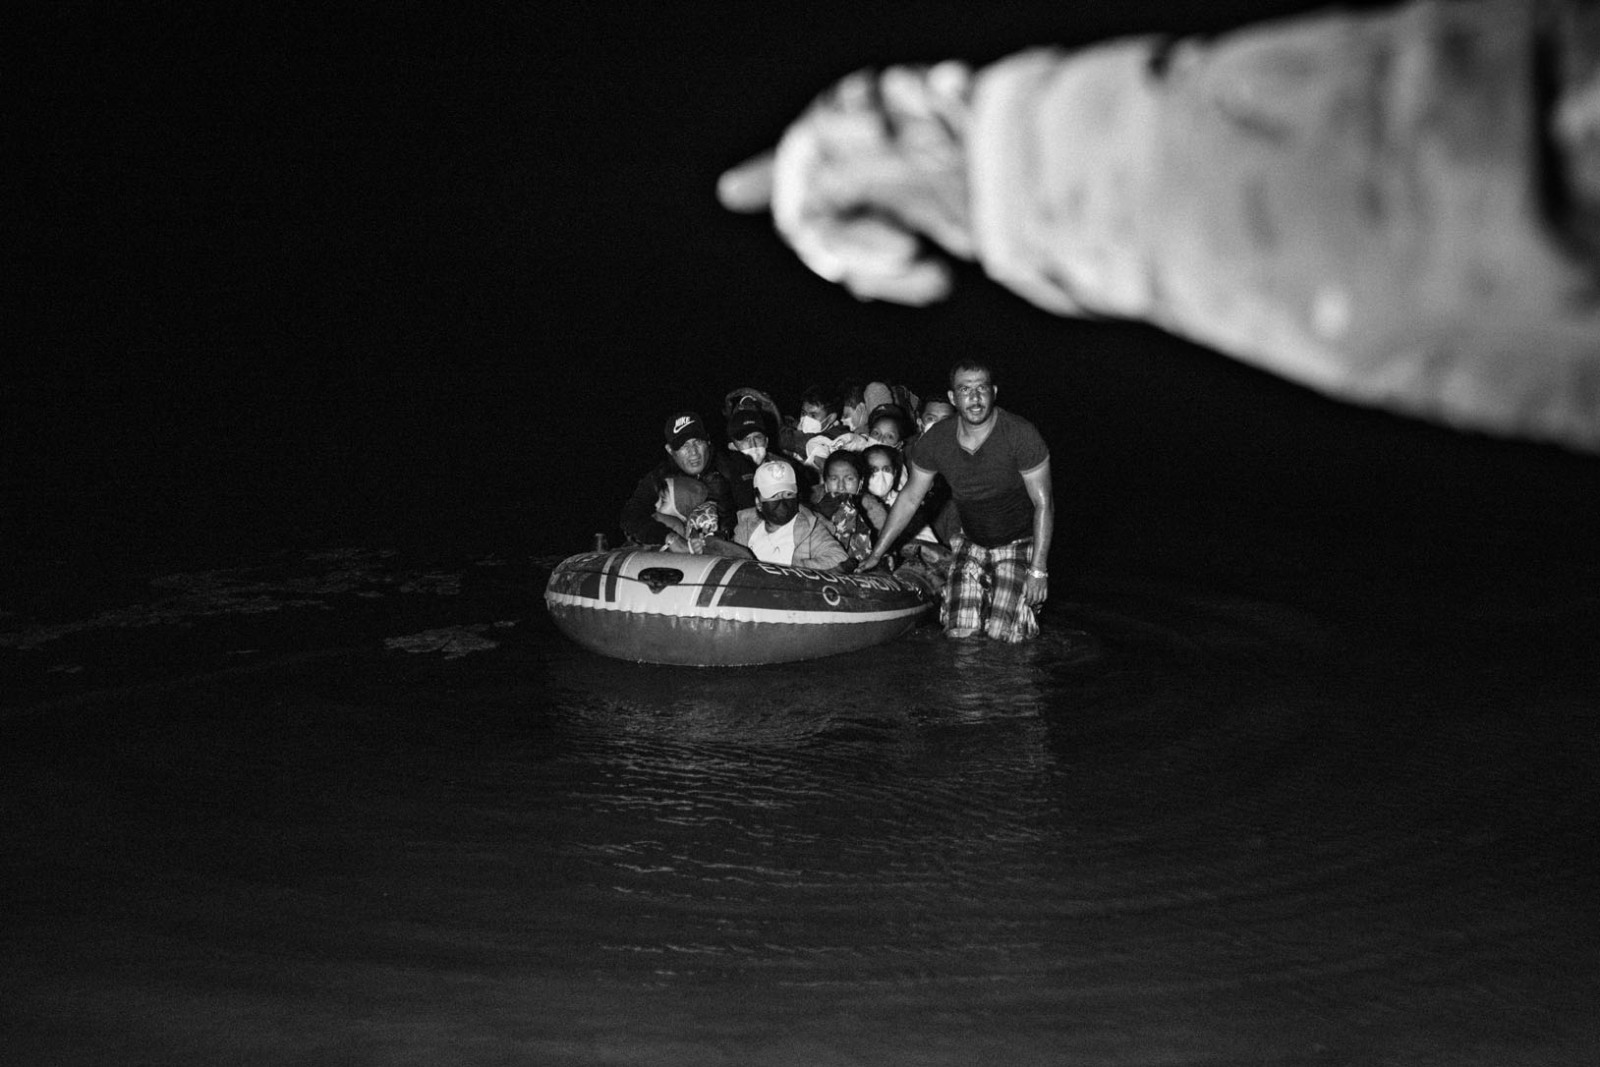 A man leads a group of migrants across the Rio Grande while an American soldier points to an easy docking point in Roma, Texas, on May 28, 2021.
The United States was essentially closed to asylum seekers for most of 2020, denying their claims with arguments based on Title 42, a U.S. statute that allows the expulsion of migrants from a country where a virus such as Covid-19 is present. 
In 2021, an unprecedented number of people seeking humanitarian protection arrived at the border, traveling across Latin America from Brasil, Venezuela, Ecuador, Haiti, Central America, and even African and Asian countries.
The photographer has worked in Roma between May and June 2021, using a light source to photograph the scenes of migrants guided by a boatman into the U.S. 
From the shore, gunshots on the other side of the border revealed a continuous war between cartels to control the migrant trade. People commented on having spent several days, or weeks, in isolated farms on the Mexican side waiting for the traffickers to move them at the Rio Grande River.
The boatman depicted in this picture gave his permission to be photographed. He said he was paid 20 dollars for each people on his dinghy.